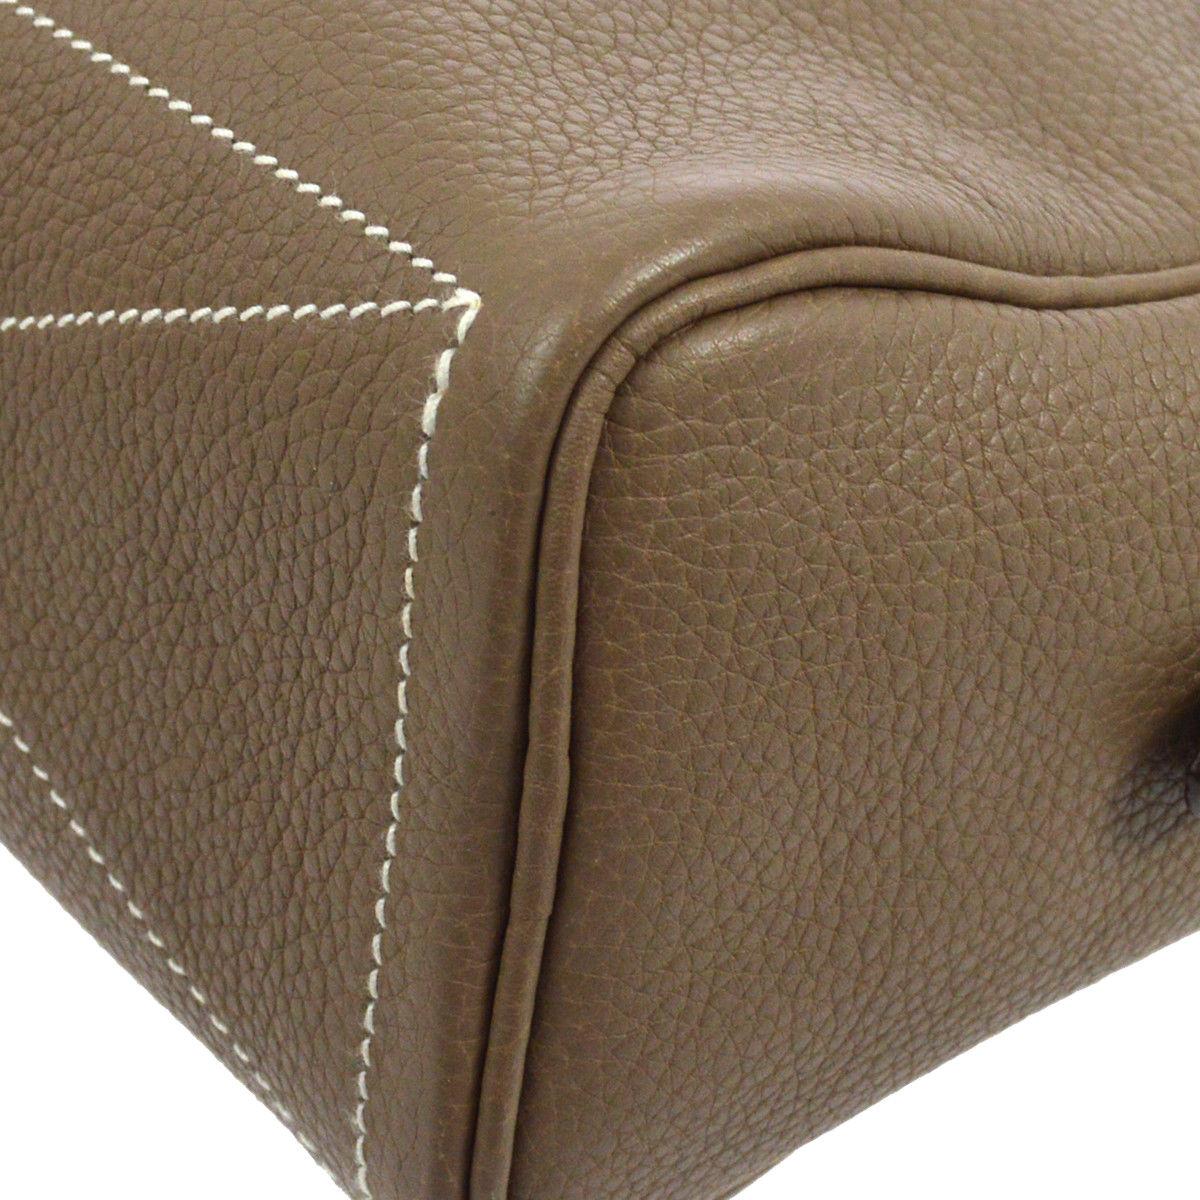 Brown Hermes Leather Taupe Men's Women's Clutch Overnight Toiletry Travel Bag